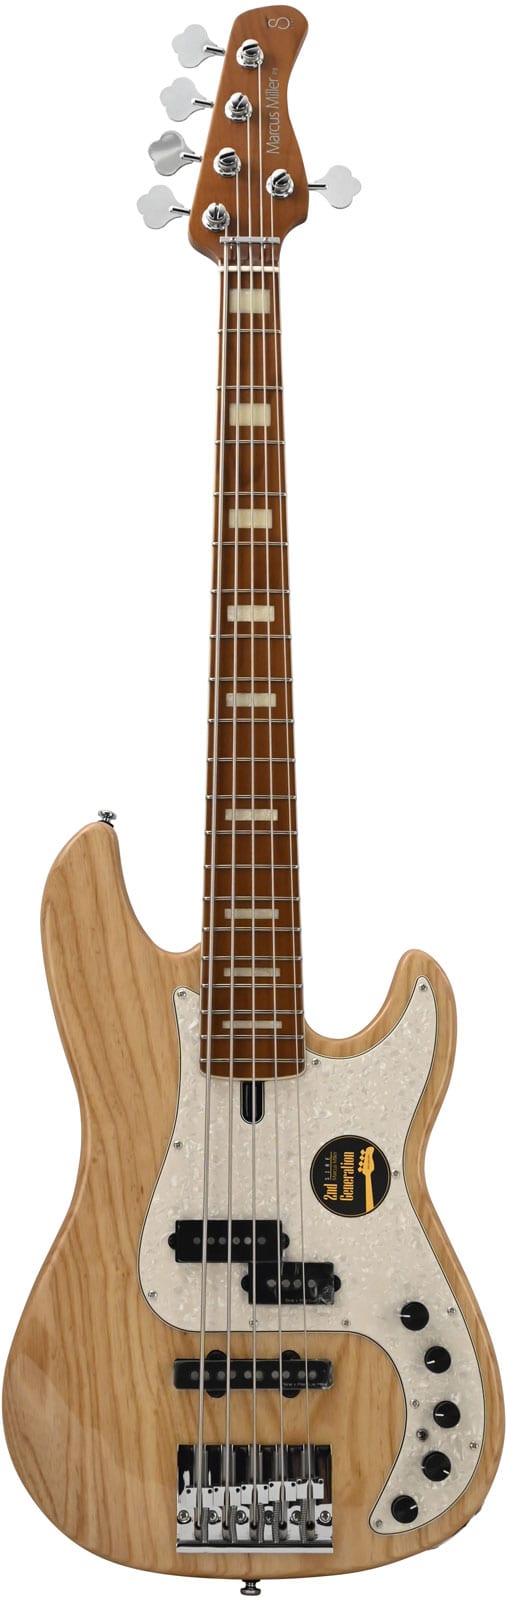 SIRE MARCUS MILLER P8 SWAMP ASH-5 NT MN + HOUSSE